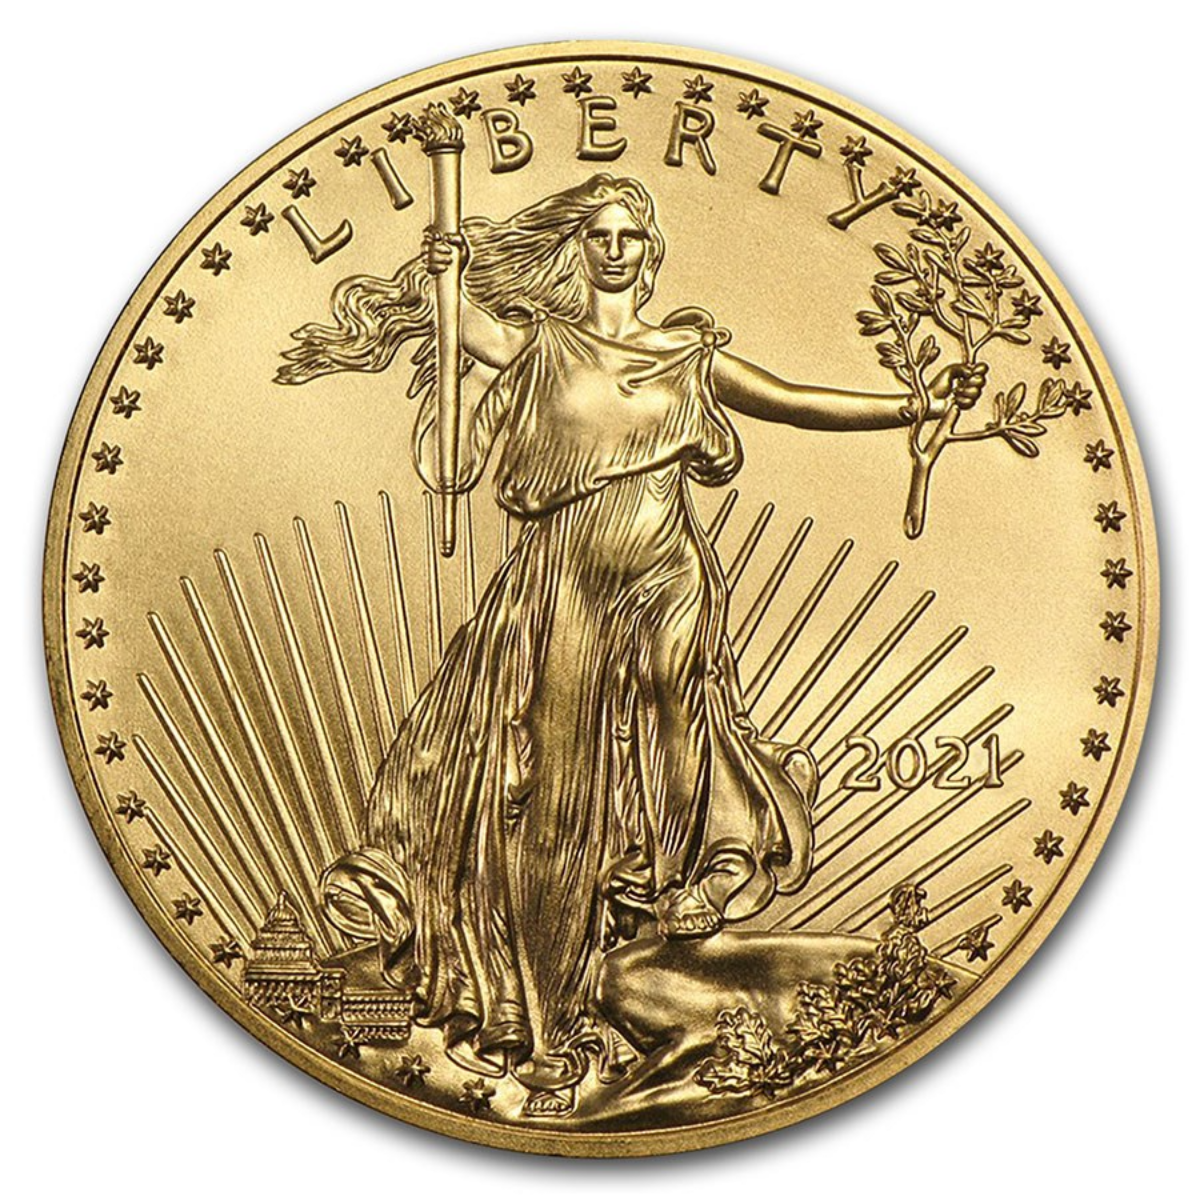 Gold Coins Archives - GSI Exchange